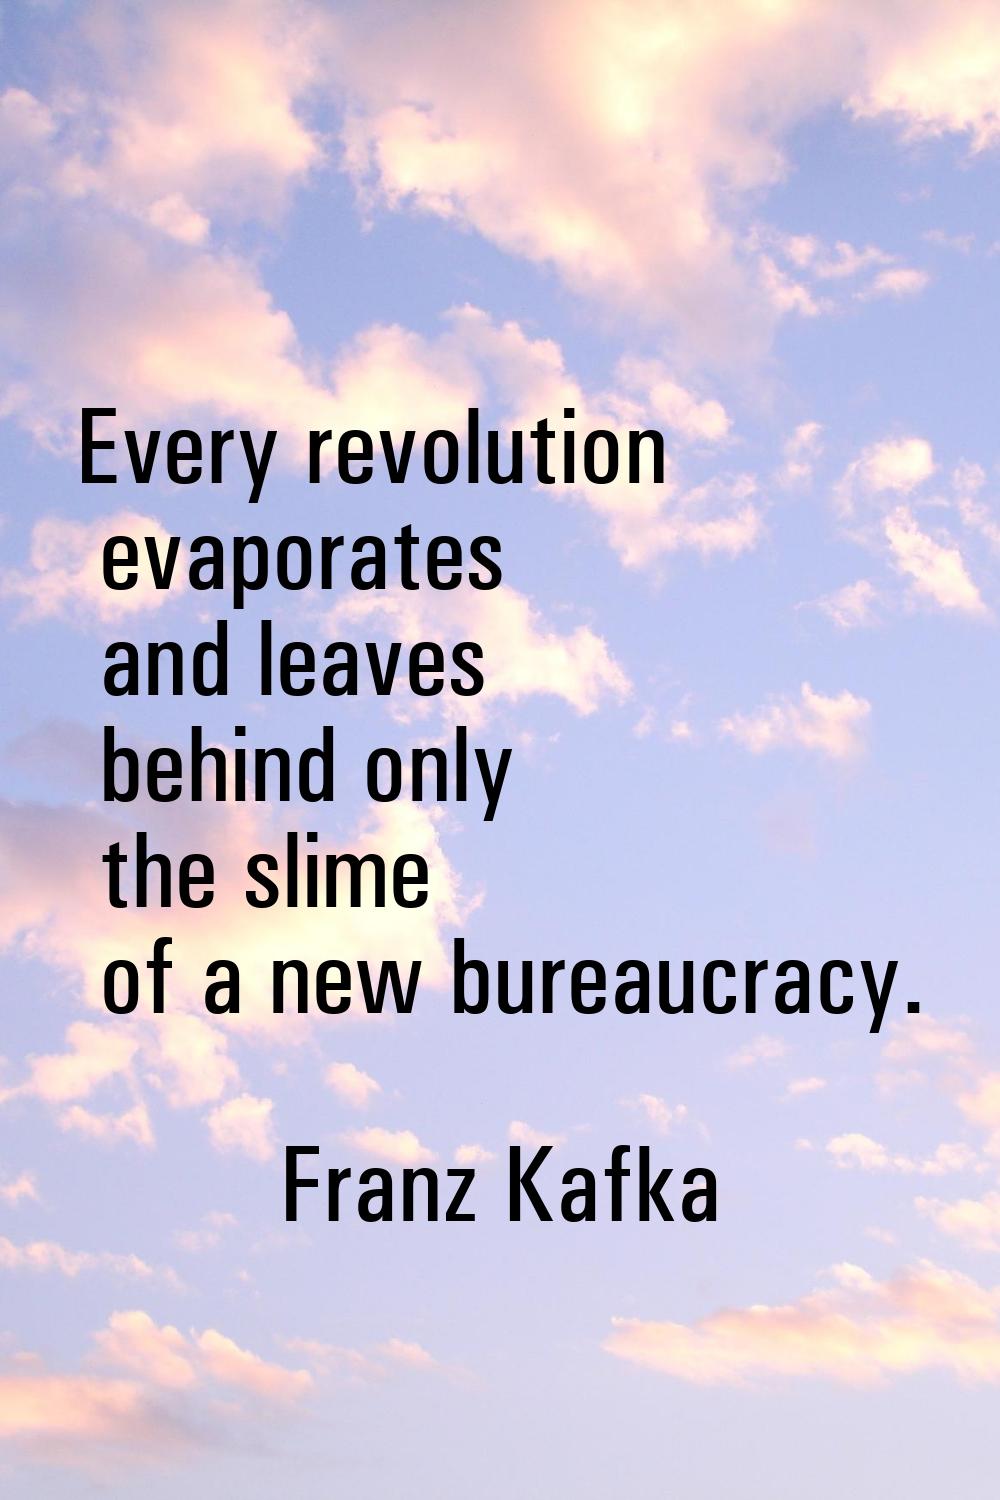 Every revolution evaporates and leaves behind only the slime of a new bureaucracy.